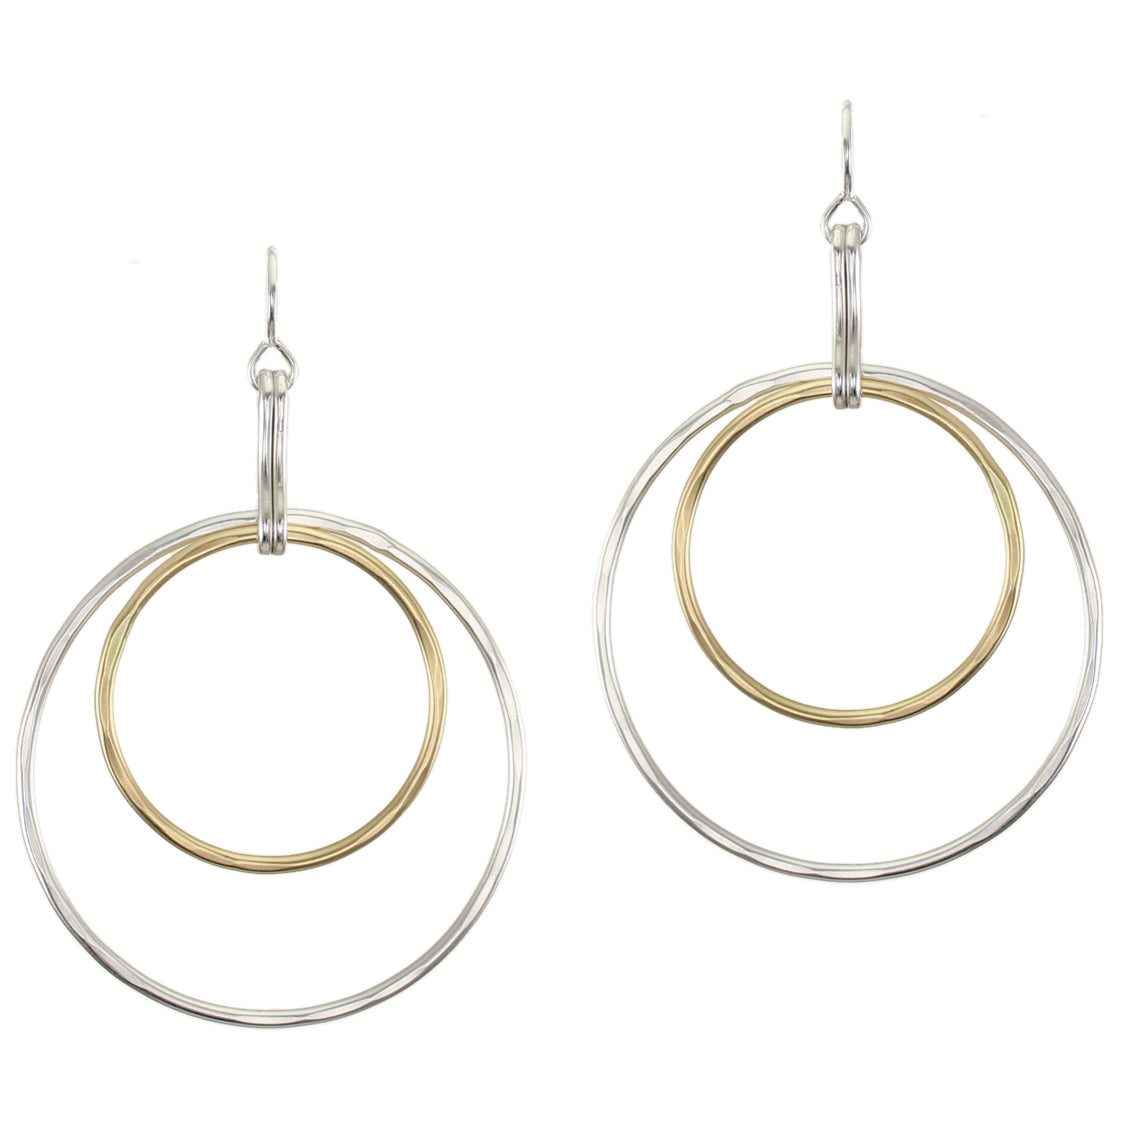 Large Hammered Rings Wire Earrings